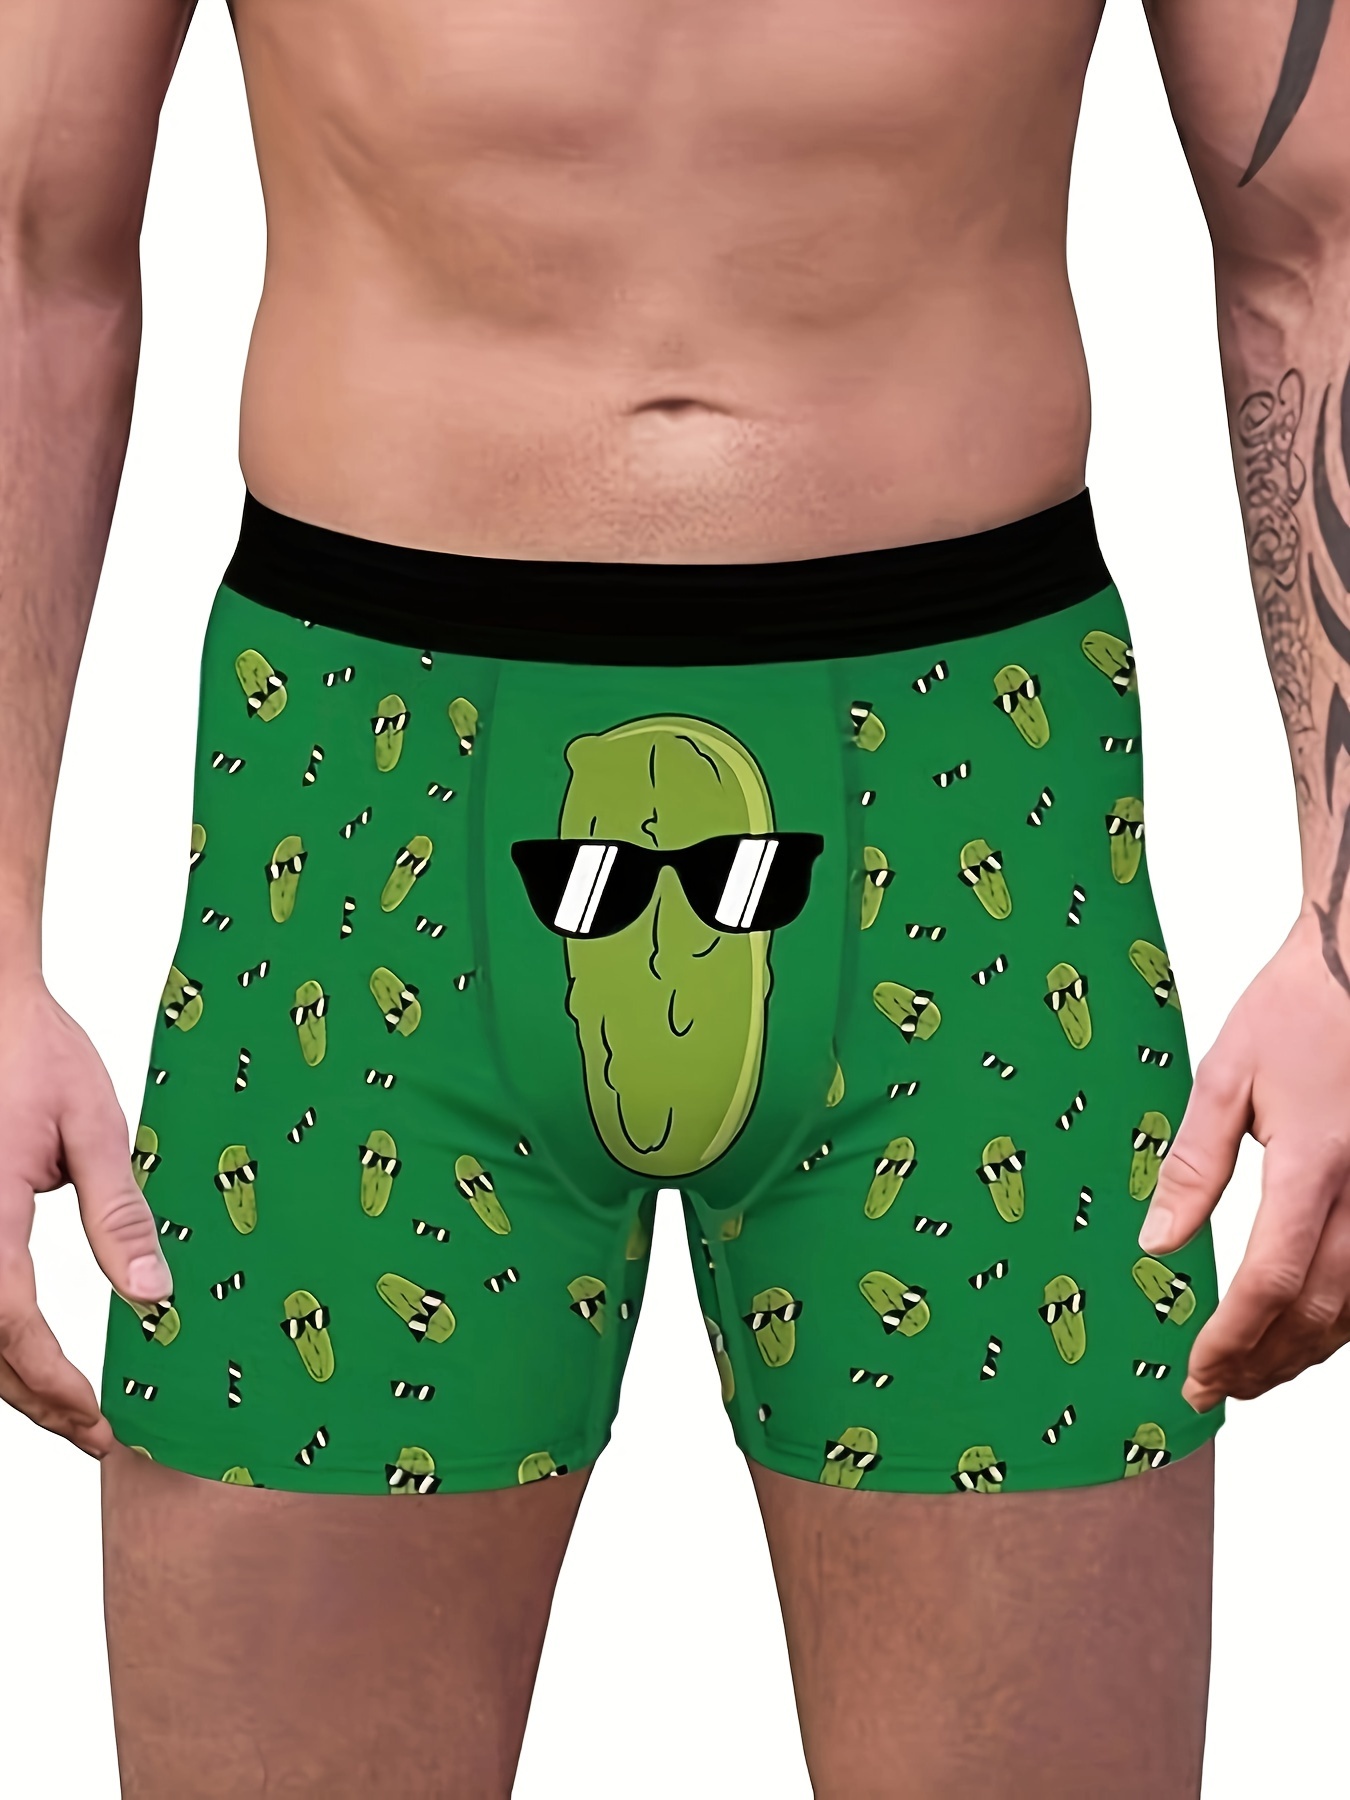 Men's Magic Lamp RUB ME Digital Print Boxers Briefs, Novelty Funny Boxers  Trunks, Breathable Comfy Stretchy Underpants, Men's Trendy Underwear